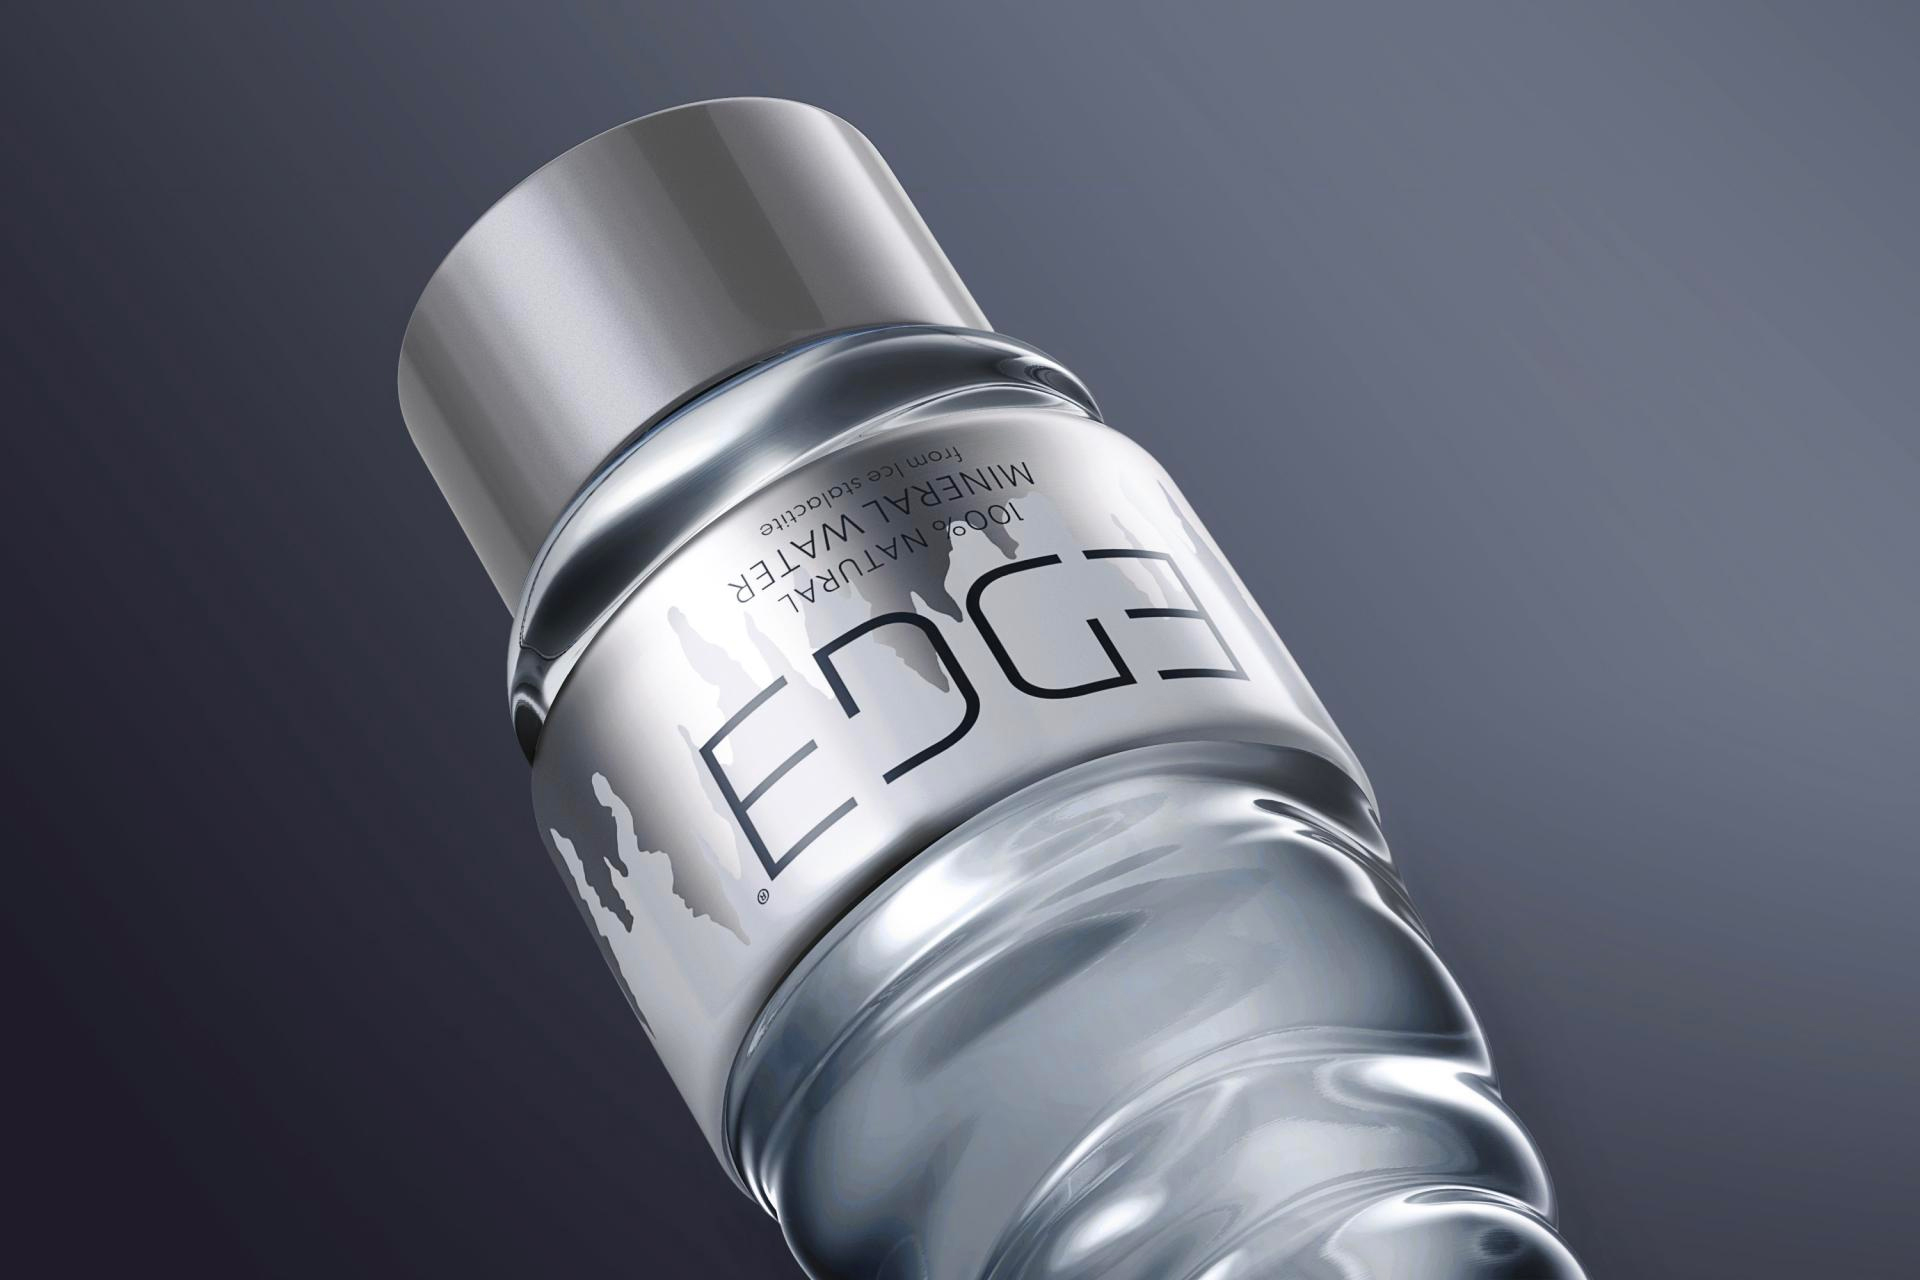 EDGE Mineral Water | Prompt Design